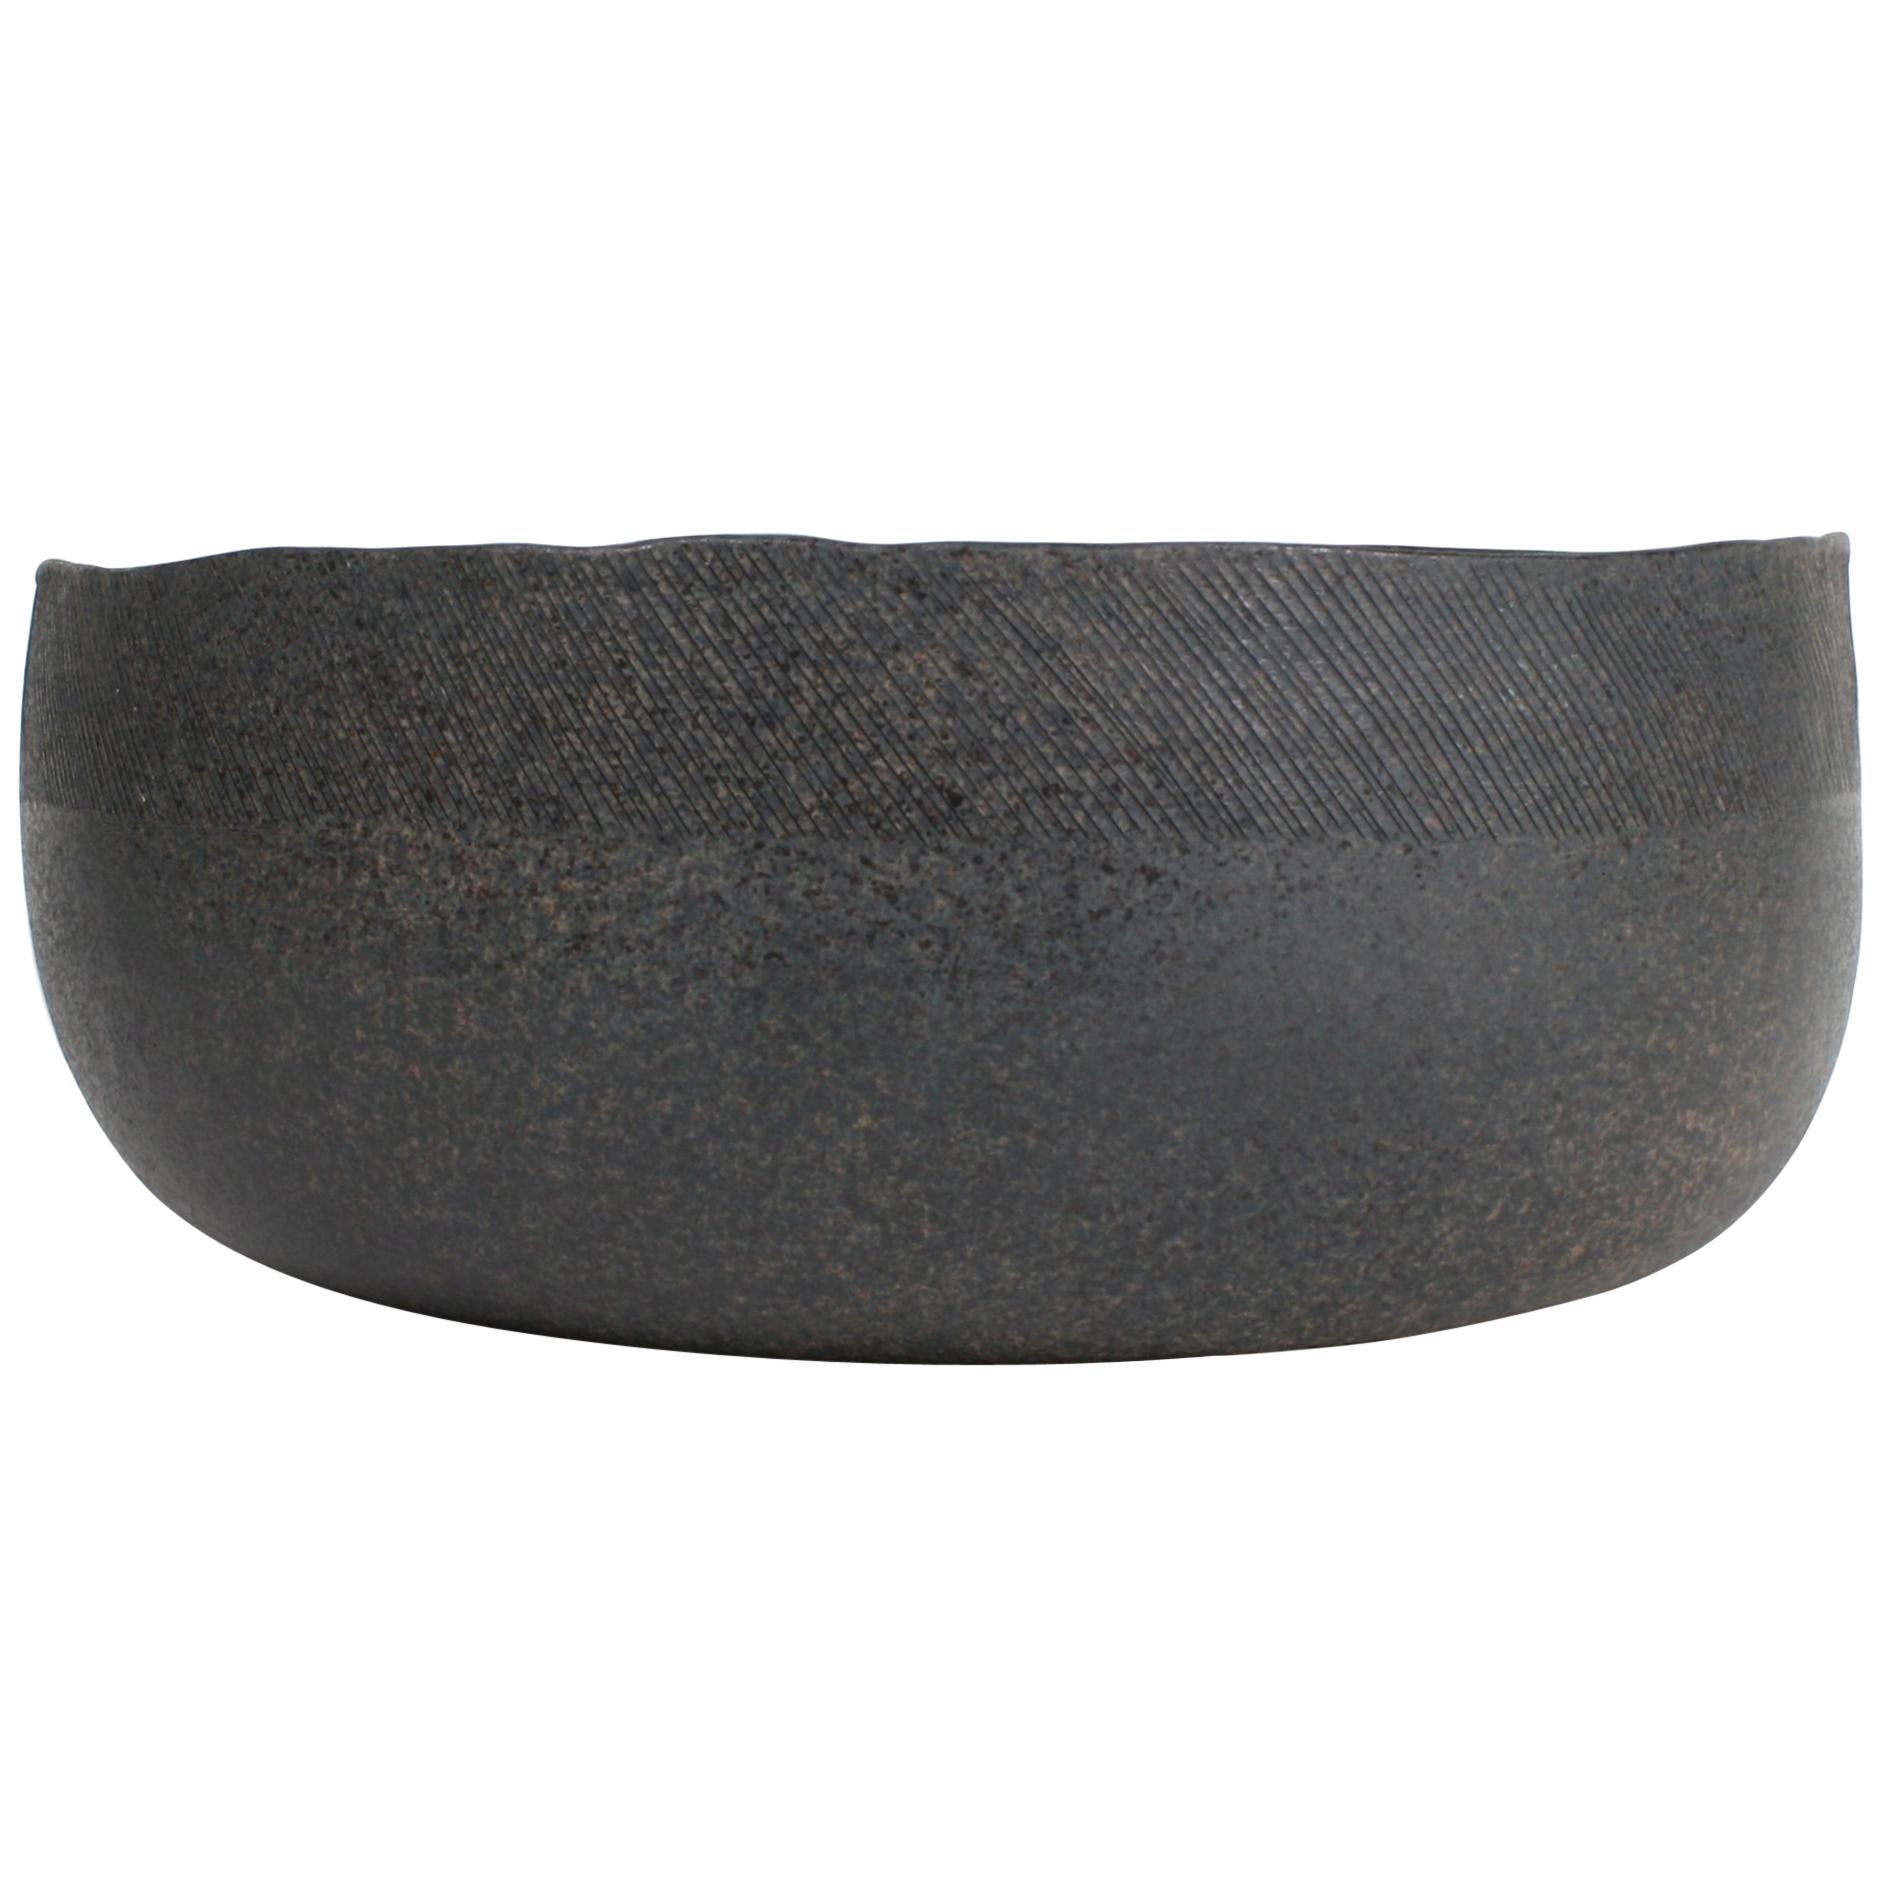 Large Contemporary Gray Stoneware Bowl, Engraved by Artist Patricia Vieljeux